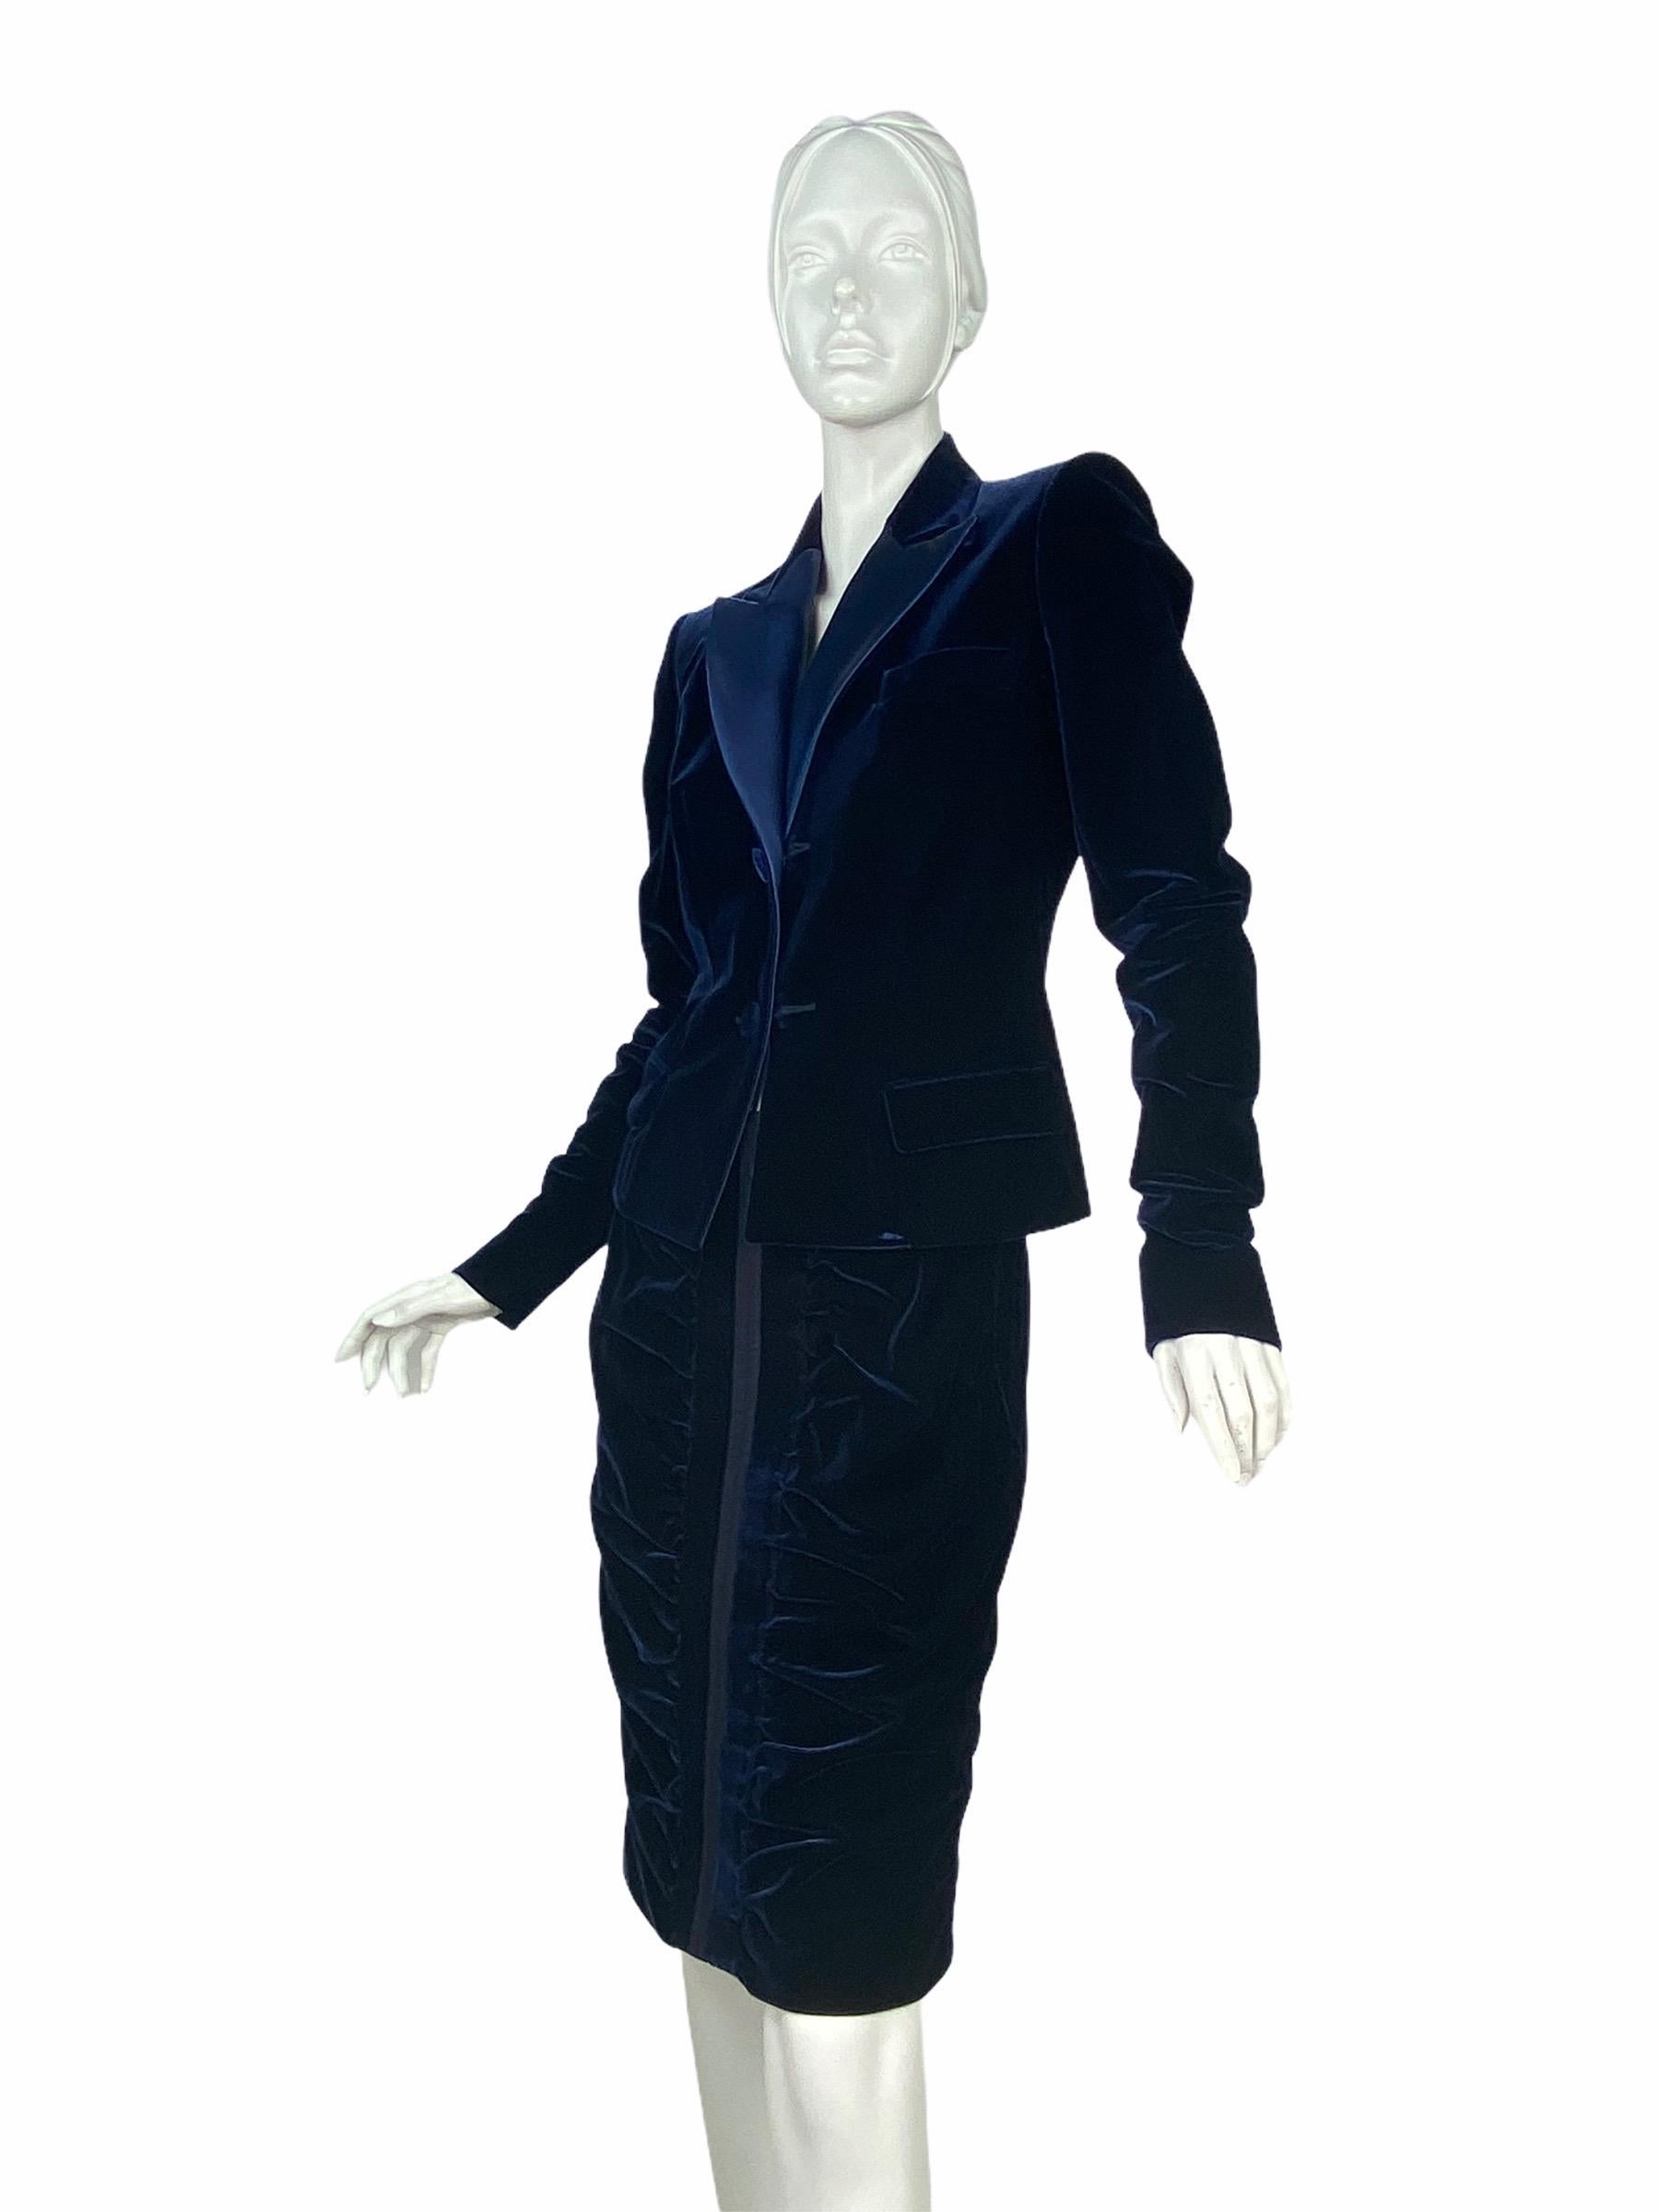 TOM FORD for YVES SAINT LAURENT BLUE VELVET SUIT

Autumn/ Winter 2002 ready-to-wear collection.

Highly collectible.

French size 38, US 6

Wear it as a suit or mix and match with your other favorite pieces

In excellent condition, like new.